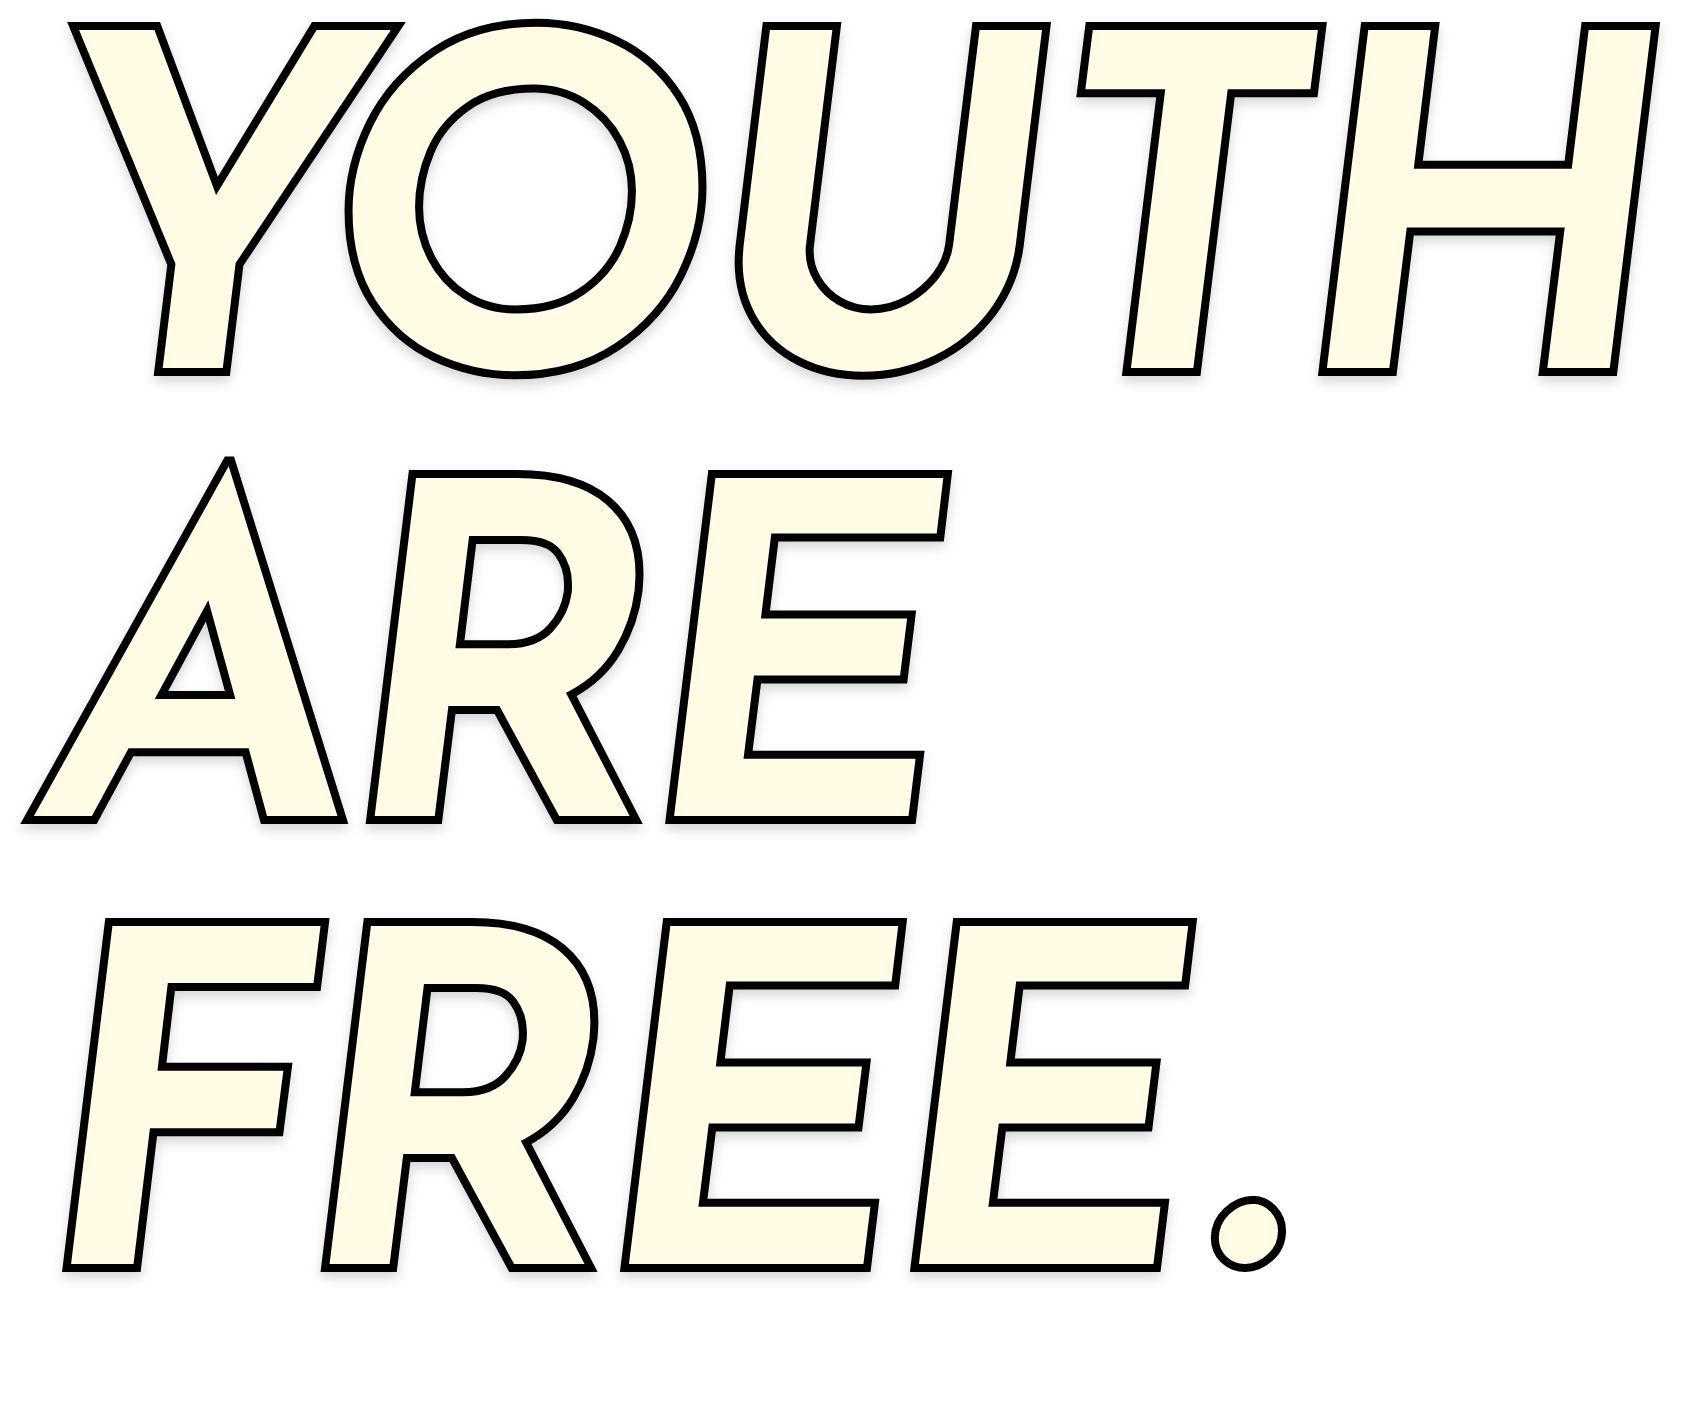 YOUTH ARE FREE.